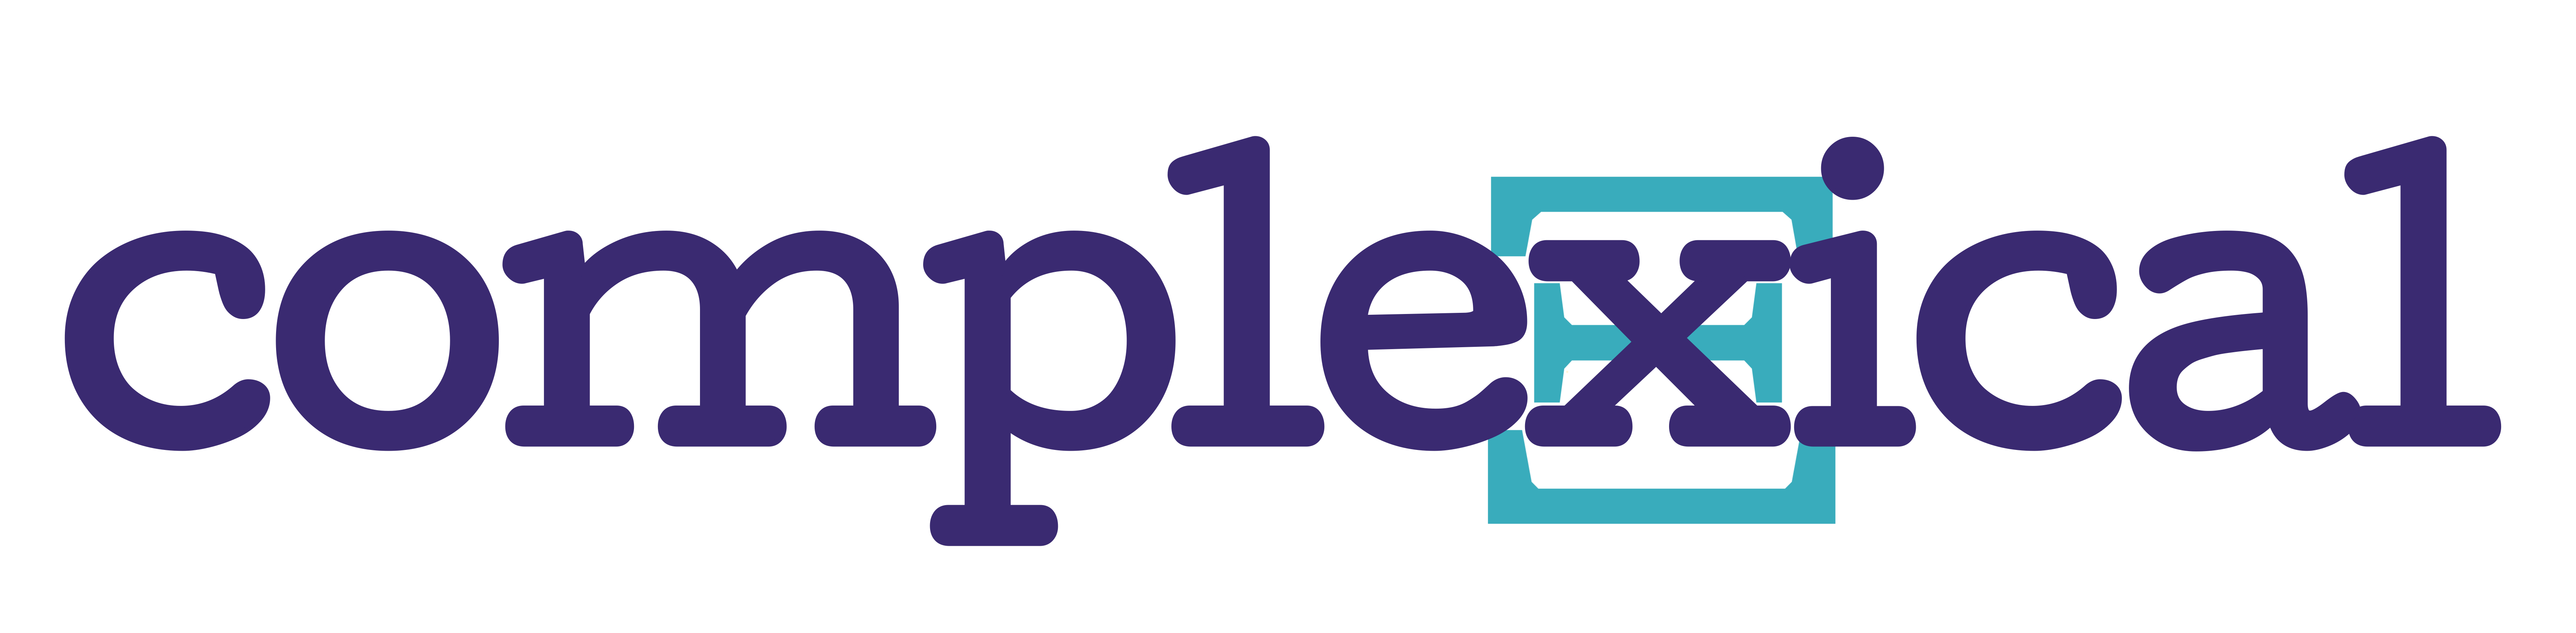 Complexical logo, purple font with blue square